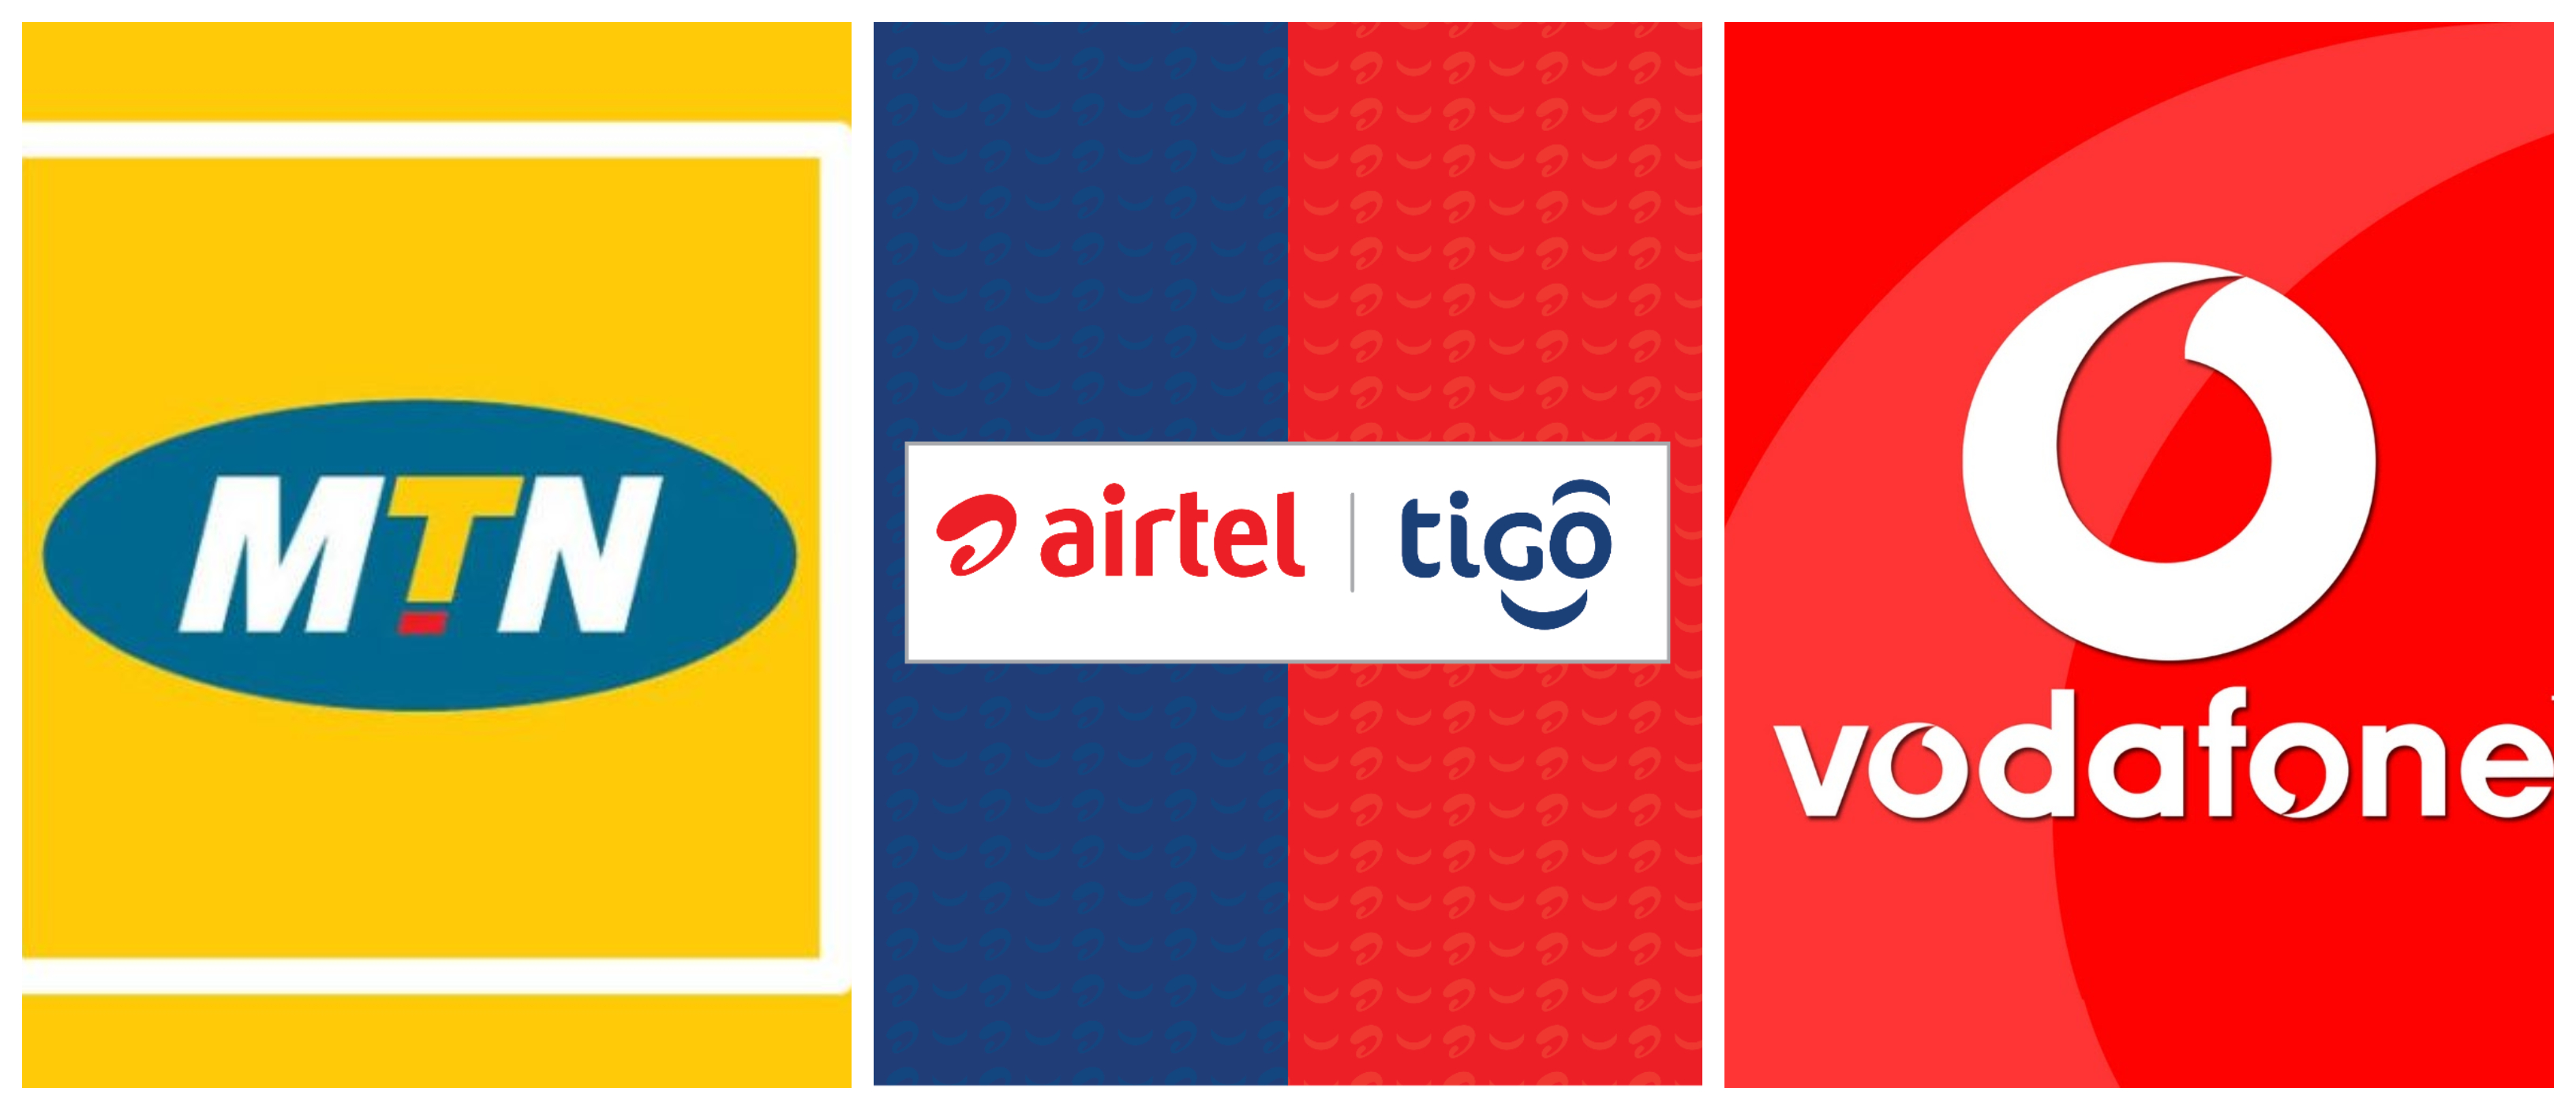 Telcos begin charging 9% Communication Service Tax today